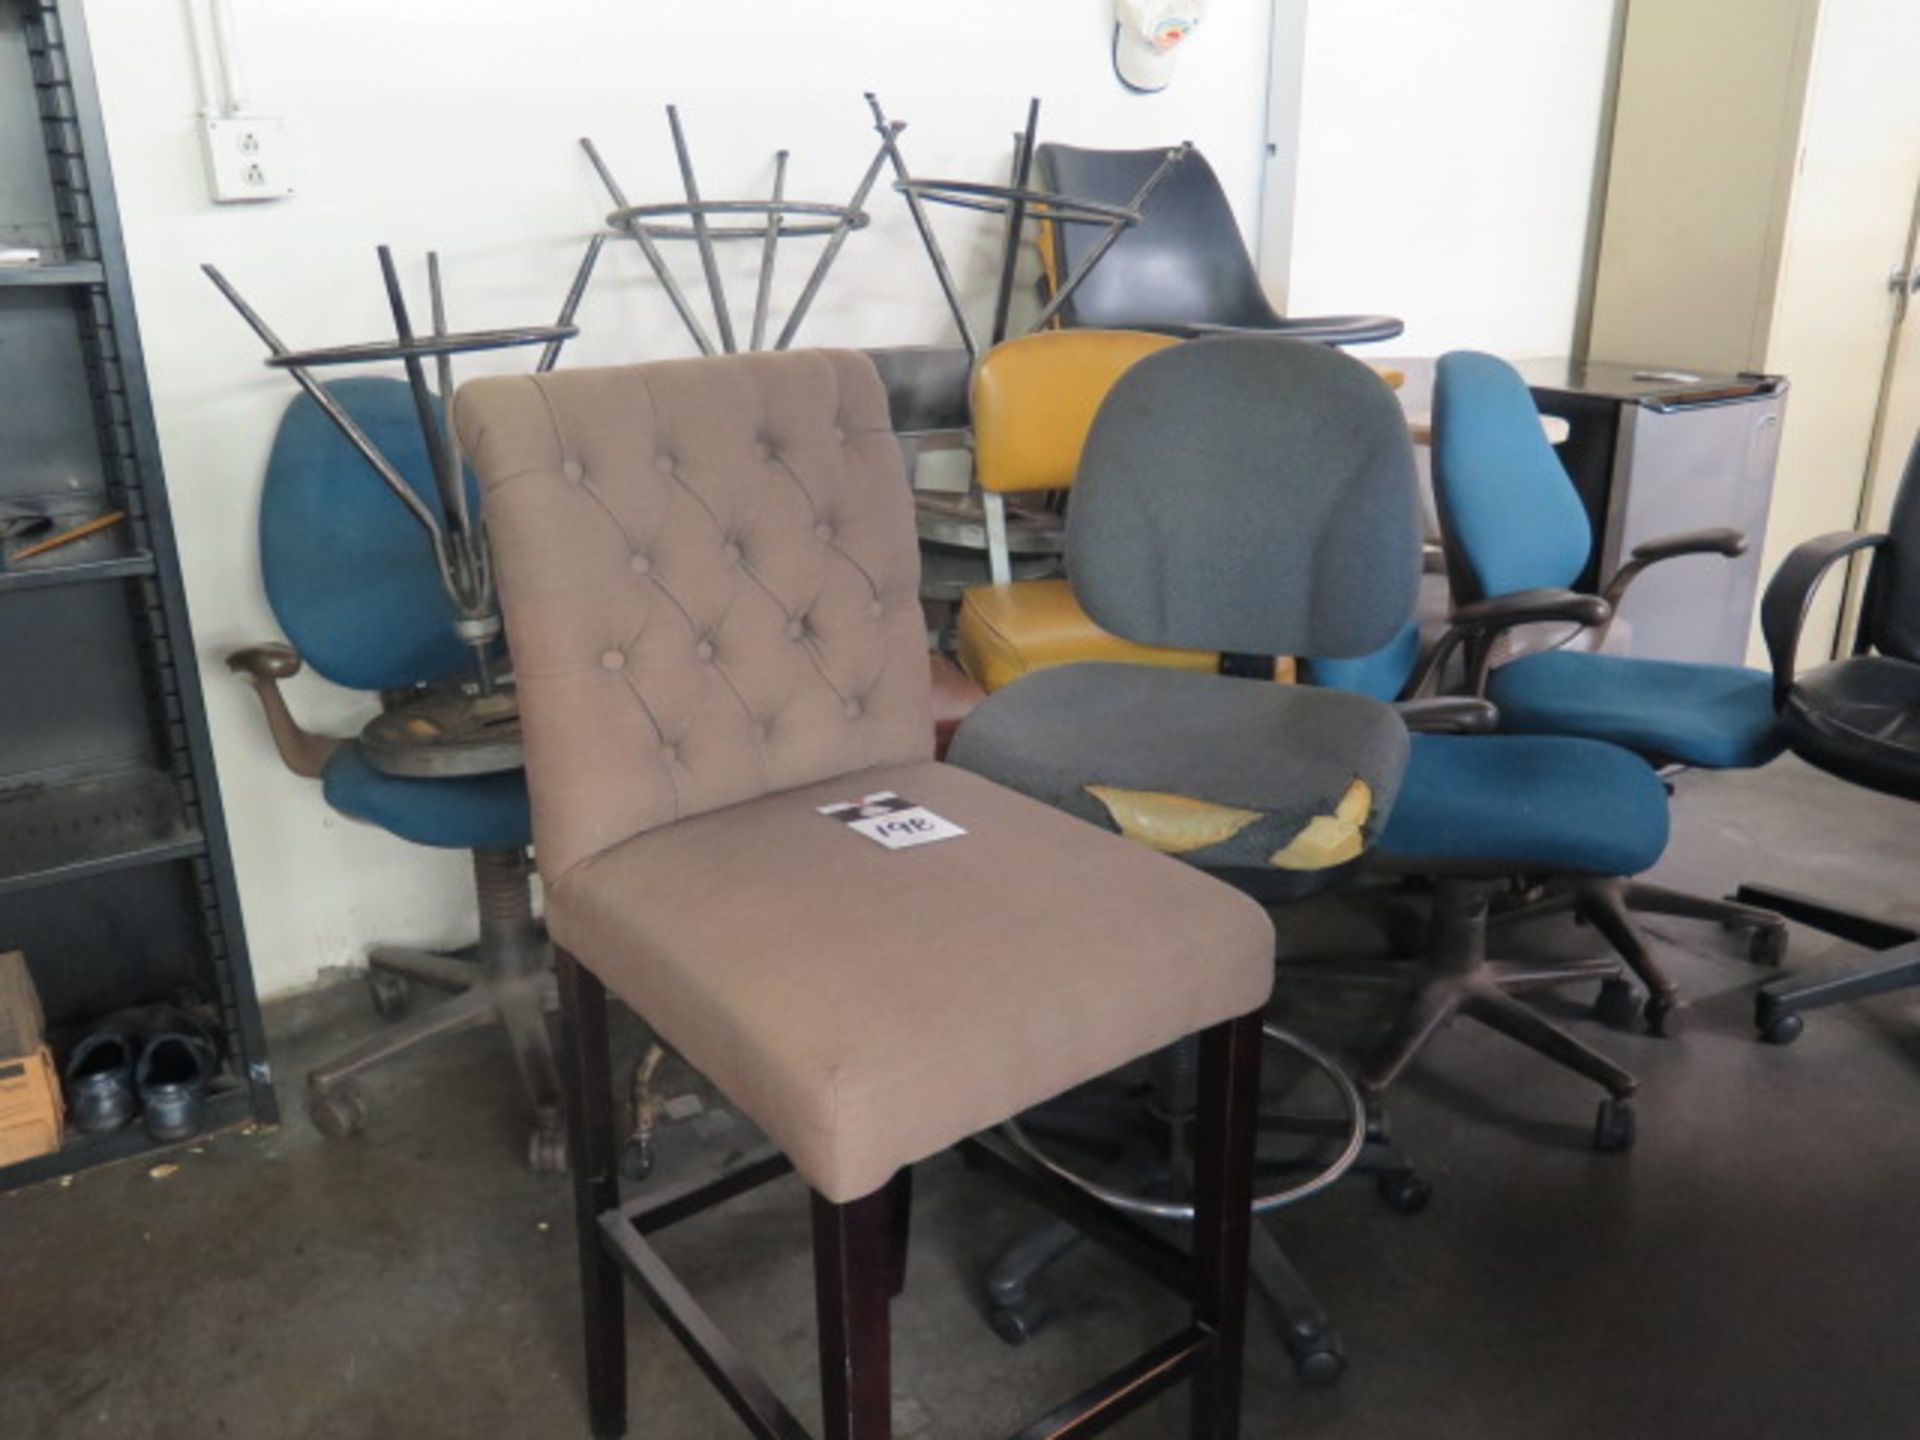 Shop Stools and Chairs (SOLD AS-IS - NO WARRANTY)